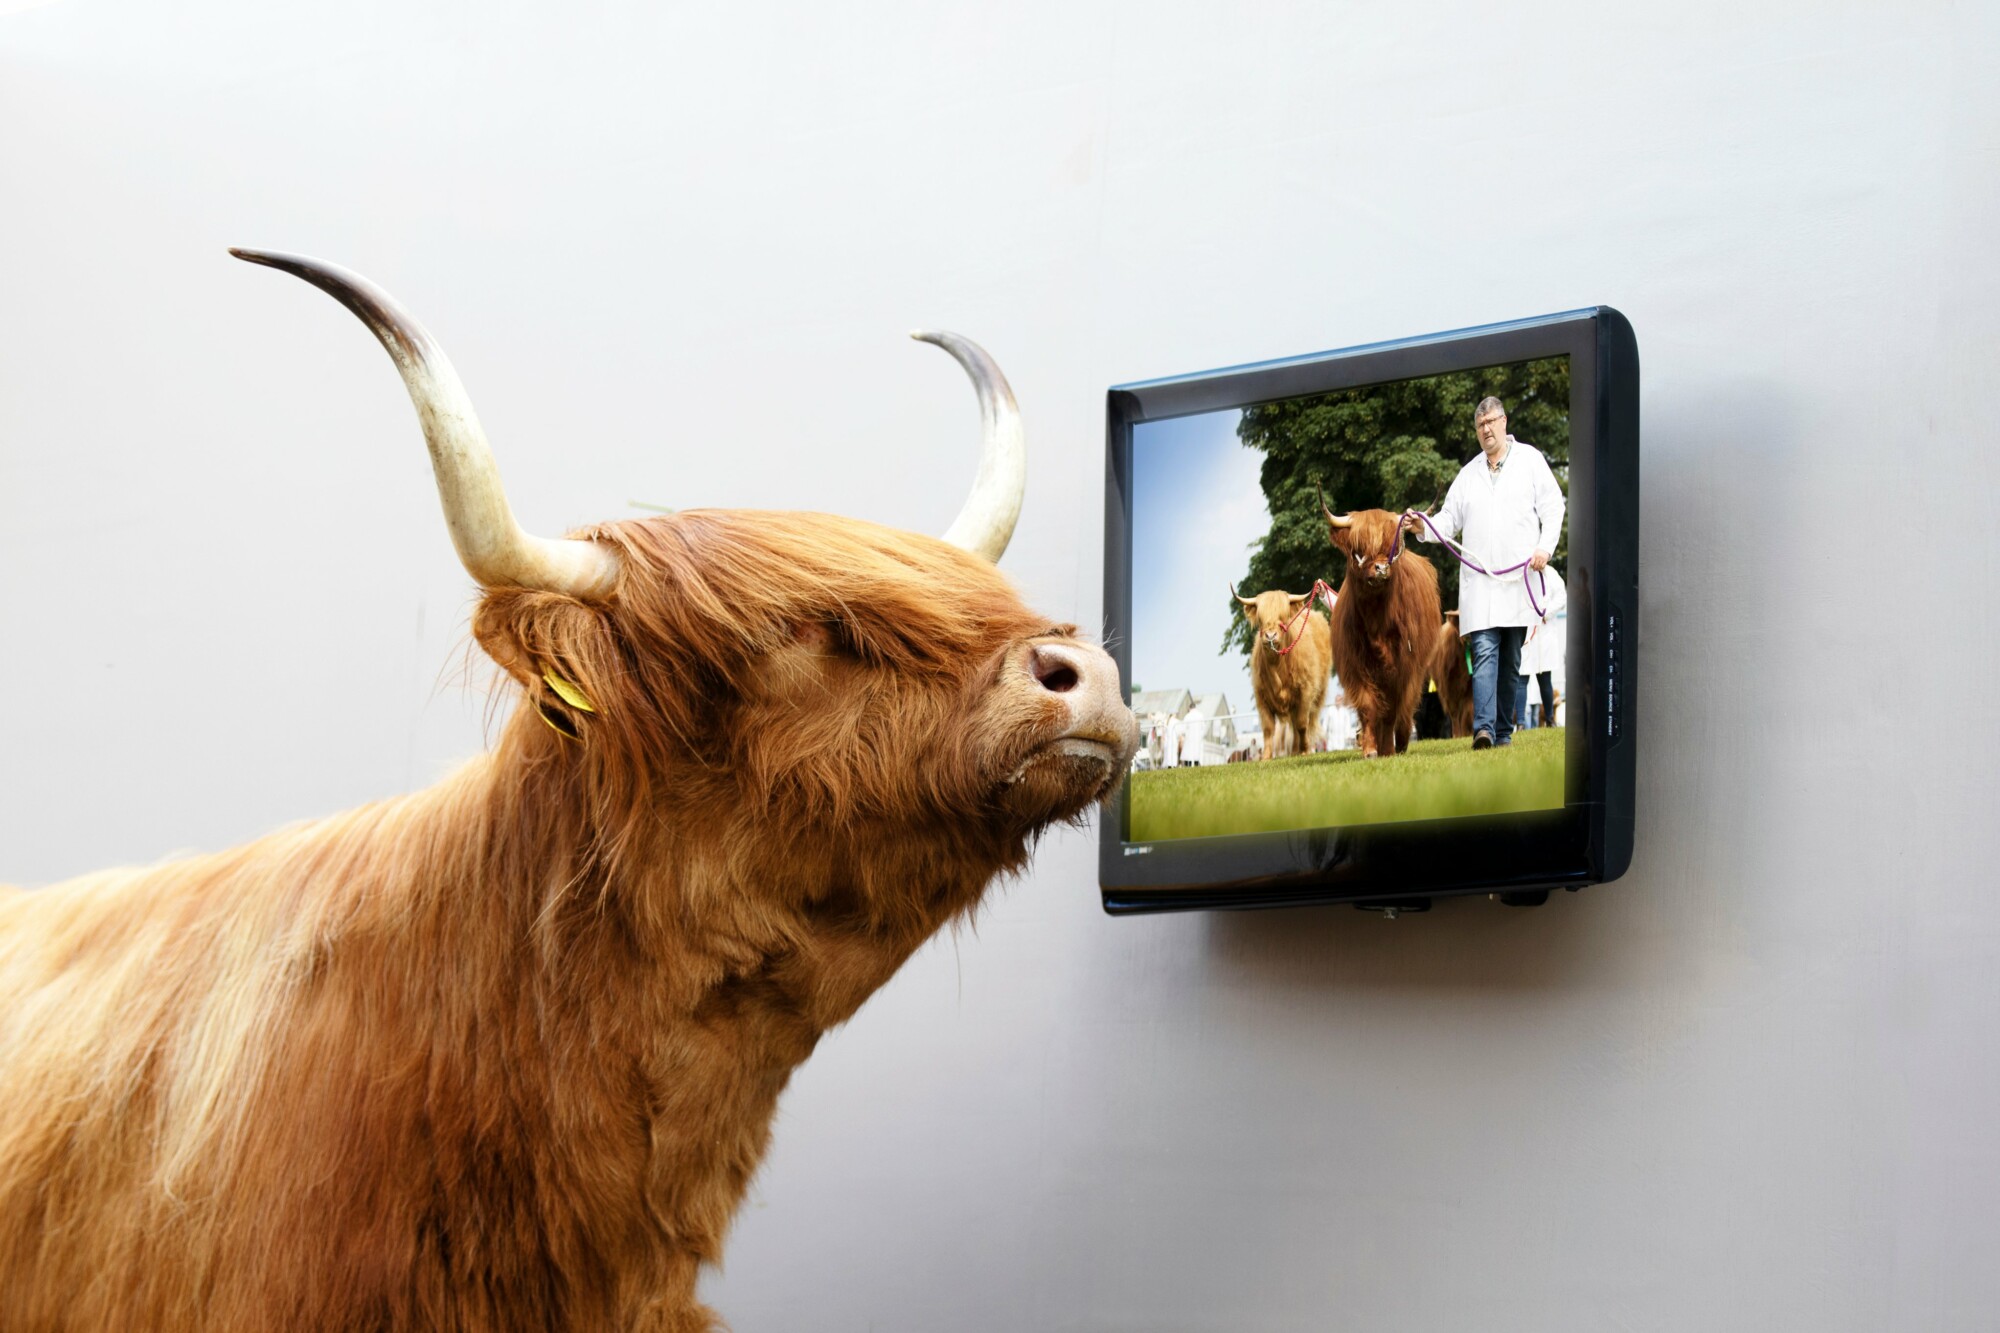 Brown cow with horns looking at a TV screen with cows being led by a farmer